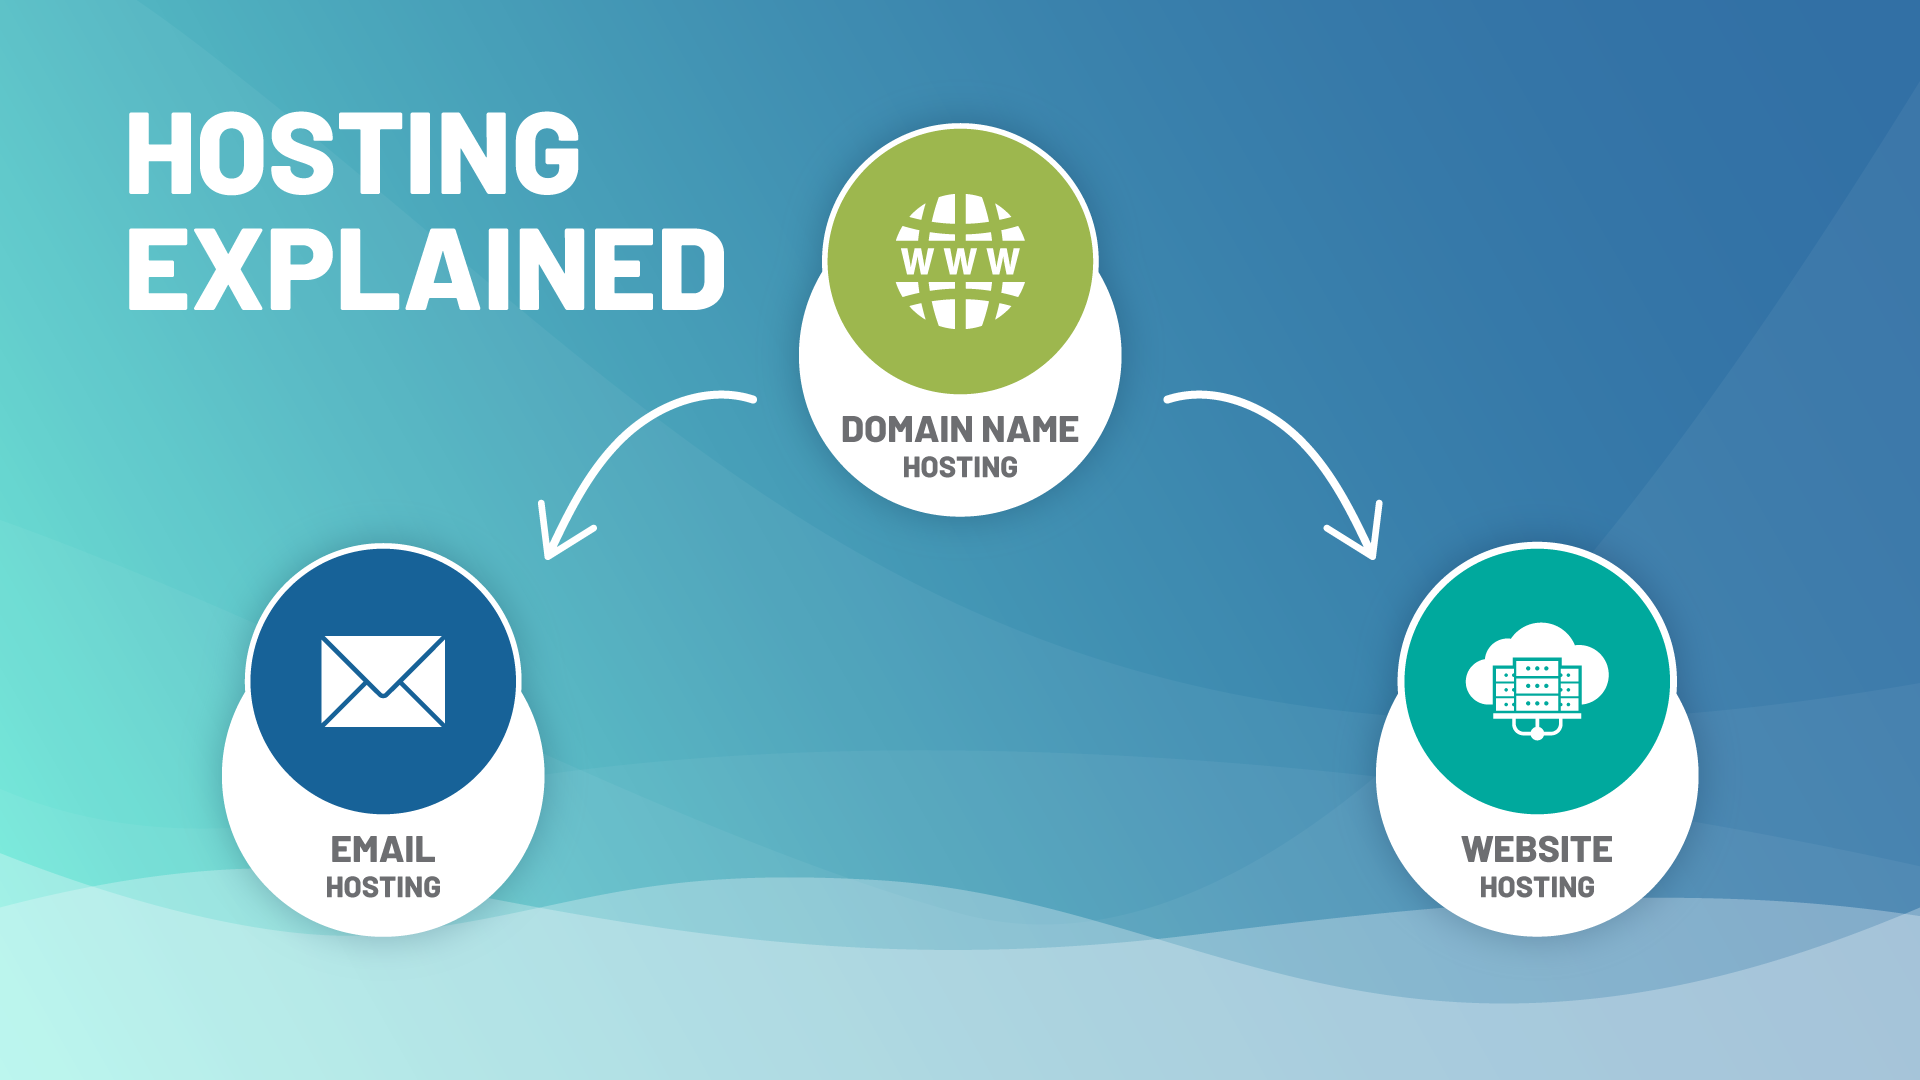 How email, domain and web hosting are connected.